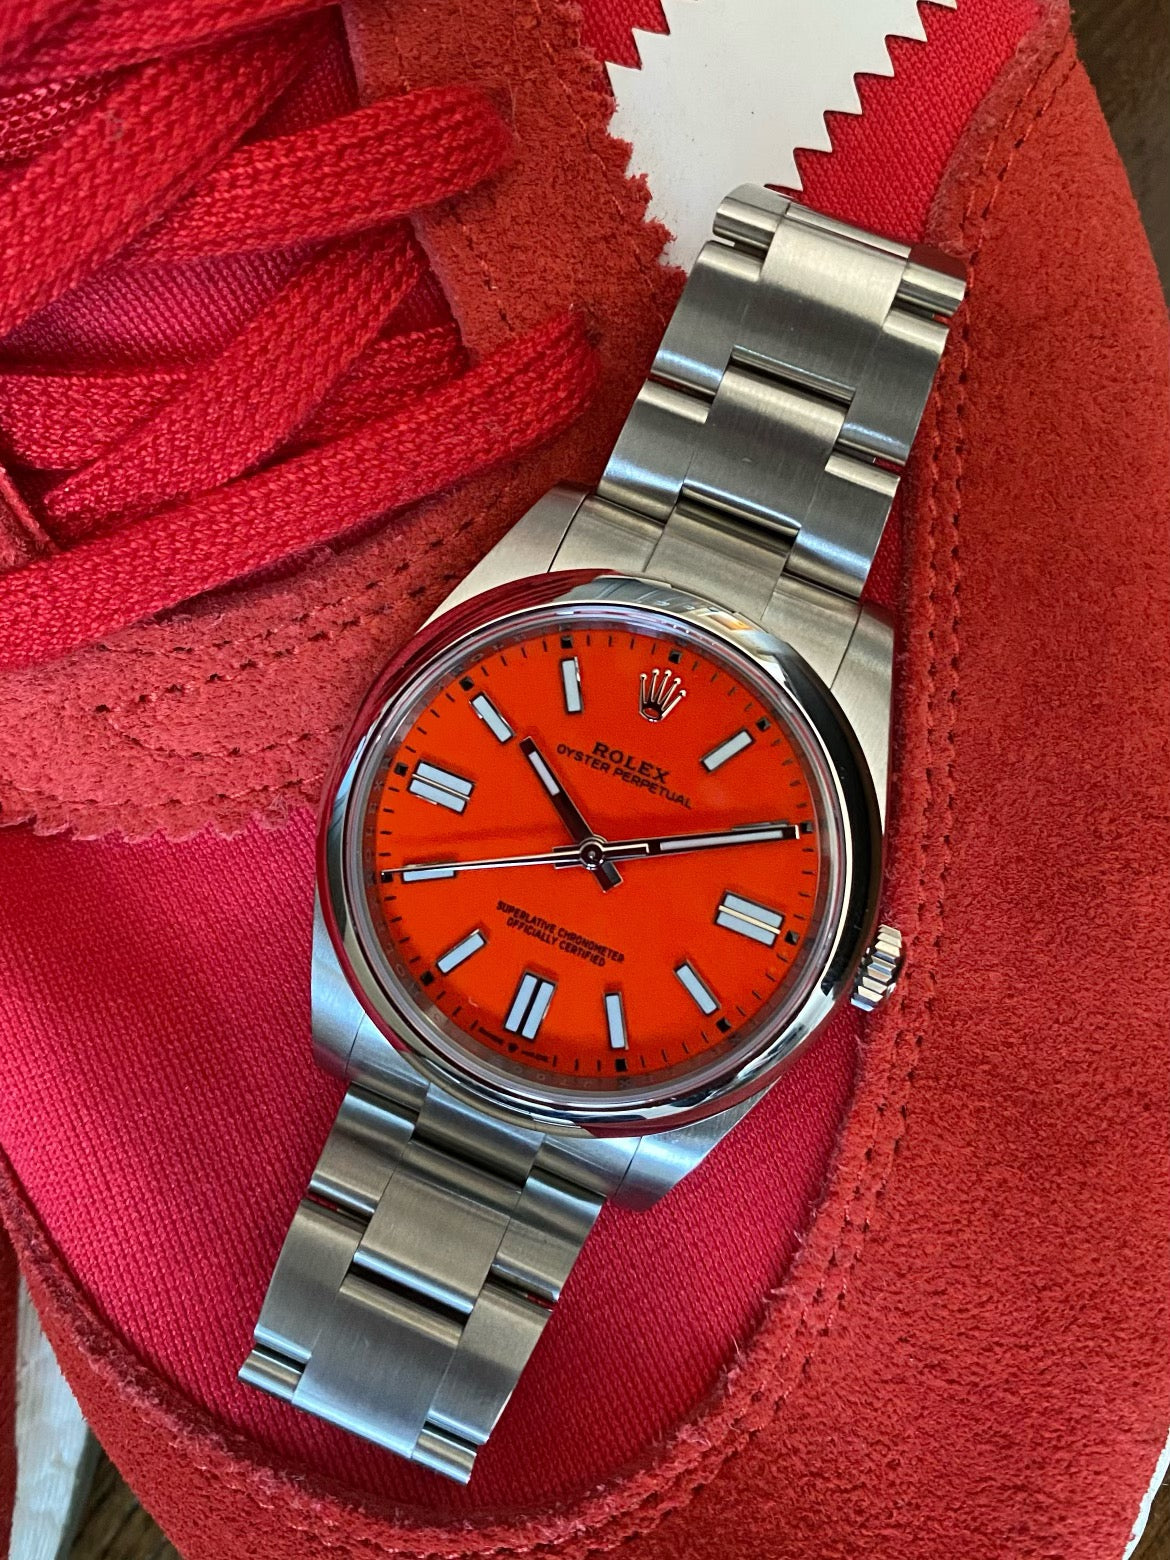 Sneakers and Watches: A Perfect Pair